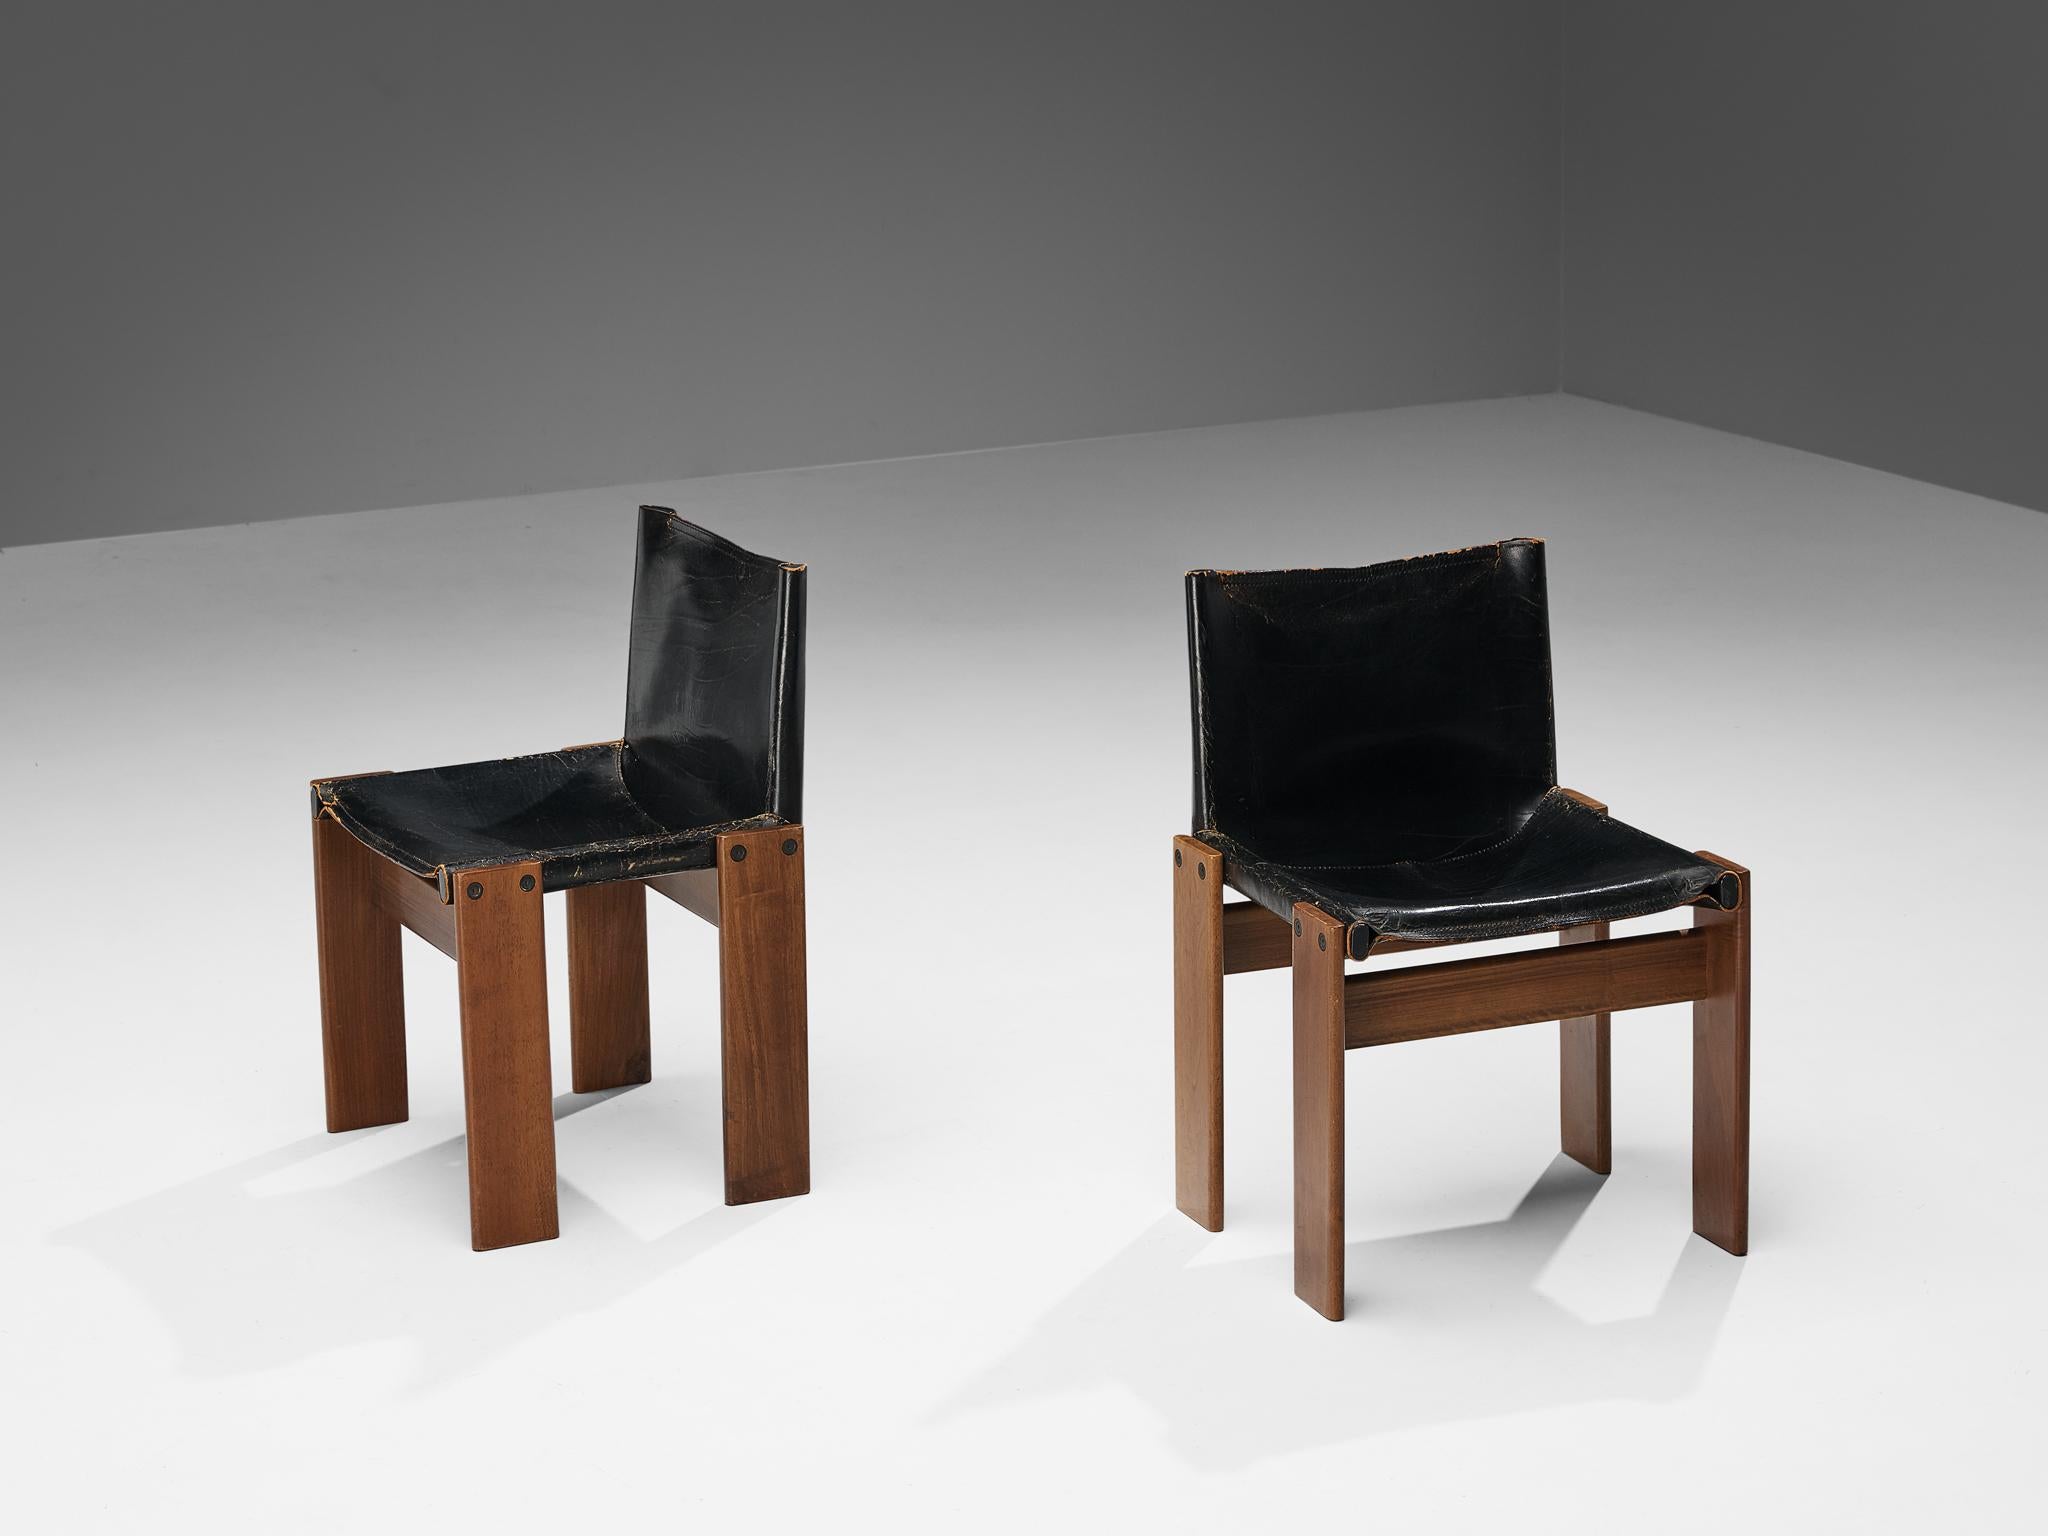 Afra & Tobia Scarpa for Molteni, set of six 'Monk' dining chairs, walnut, black leather, Italy, 1974.

Set of six 'Monk' chairs by Italian designers Afra & Tobia Scarpa. The black leather shows beautiful patina and forms a striking combination